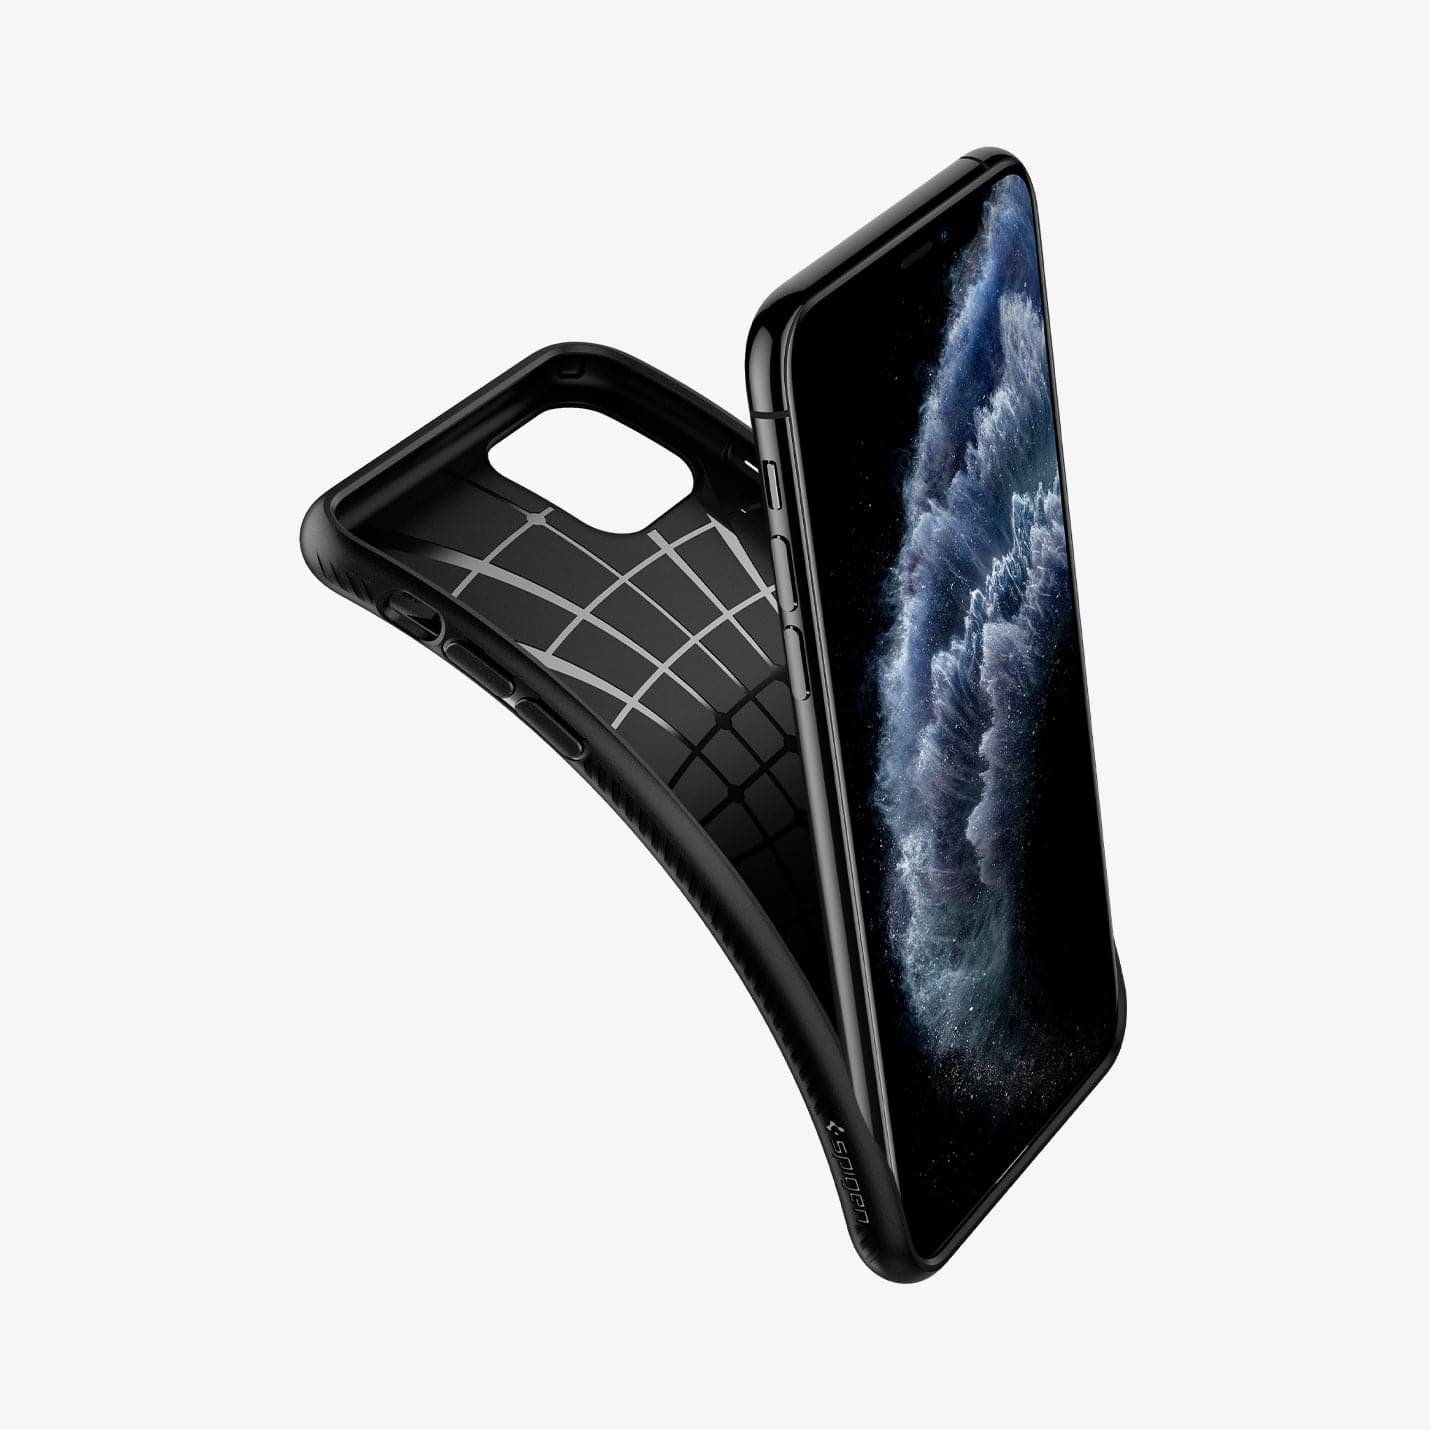 075CS27134 - iPhone 11 Pro Max Case Liquid Air in matte black showing the case bending away from device to show the flexibility